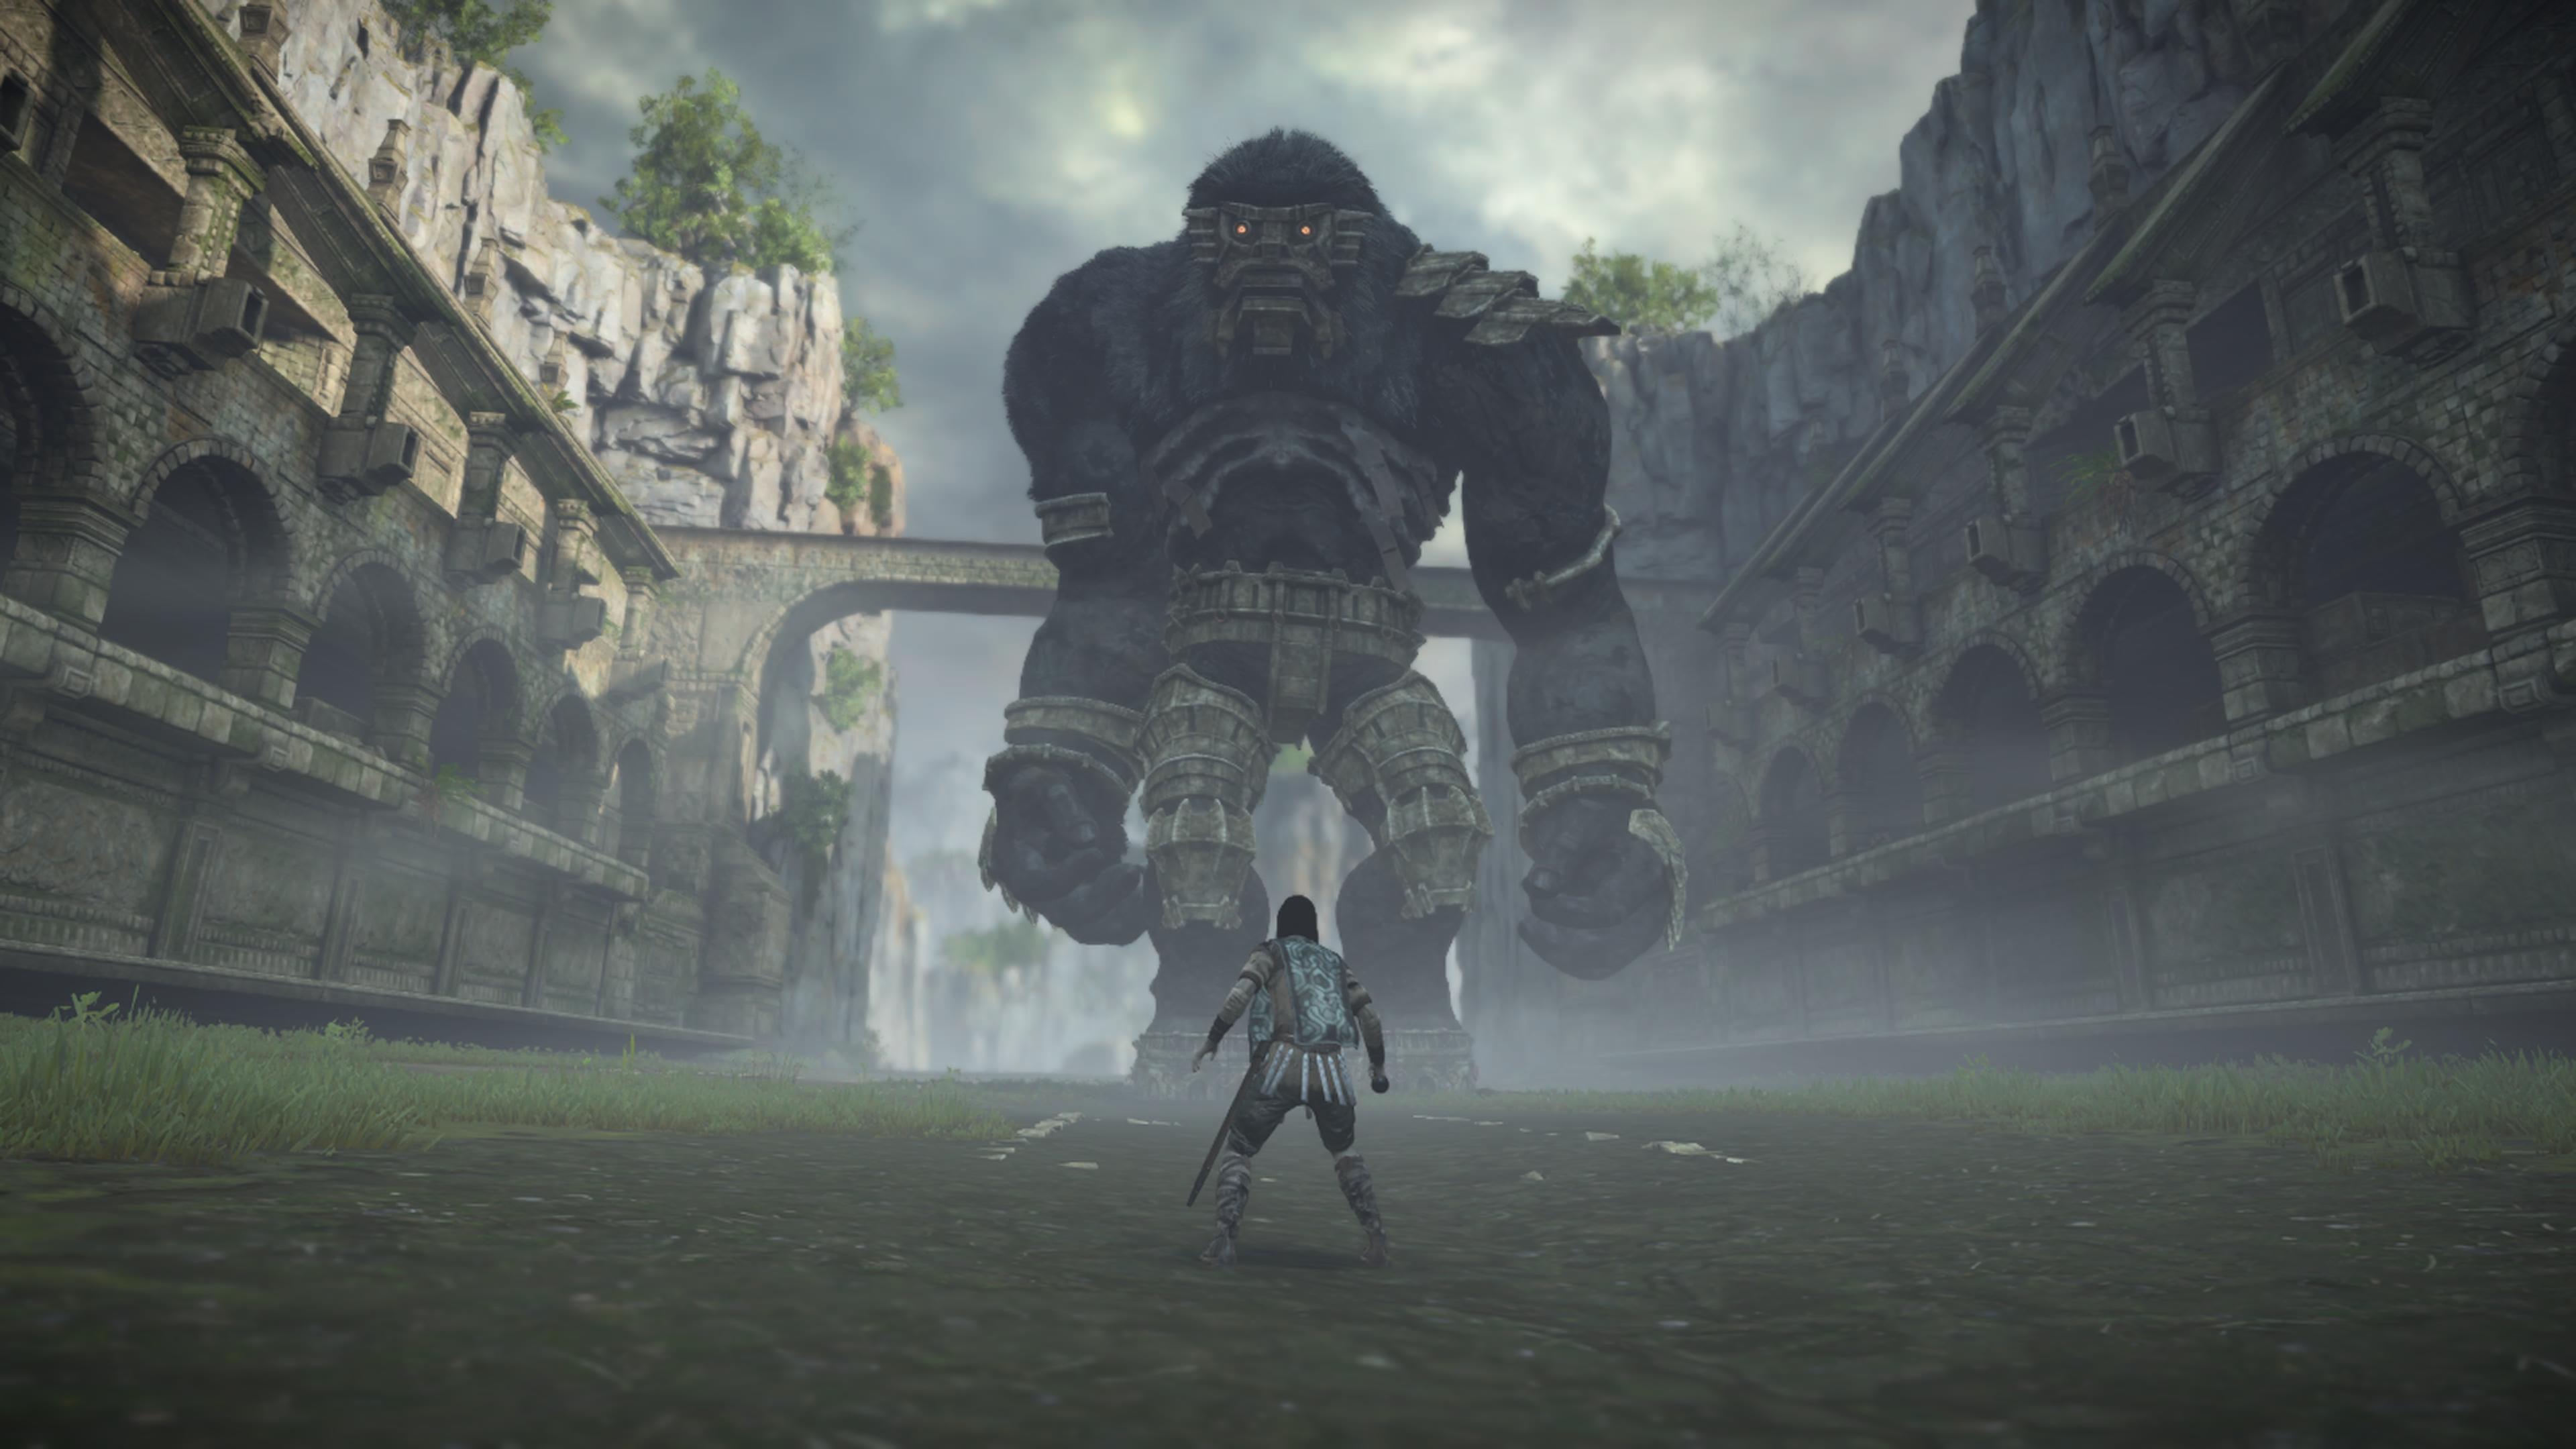 HD wallpaper, Screen Shot, Video Game Art, Playstation 5, Shadow Of The Colossus, Wander, Creature, Video Games, Playstation